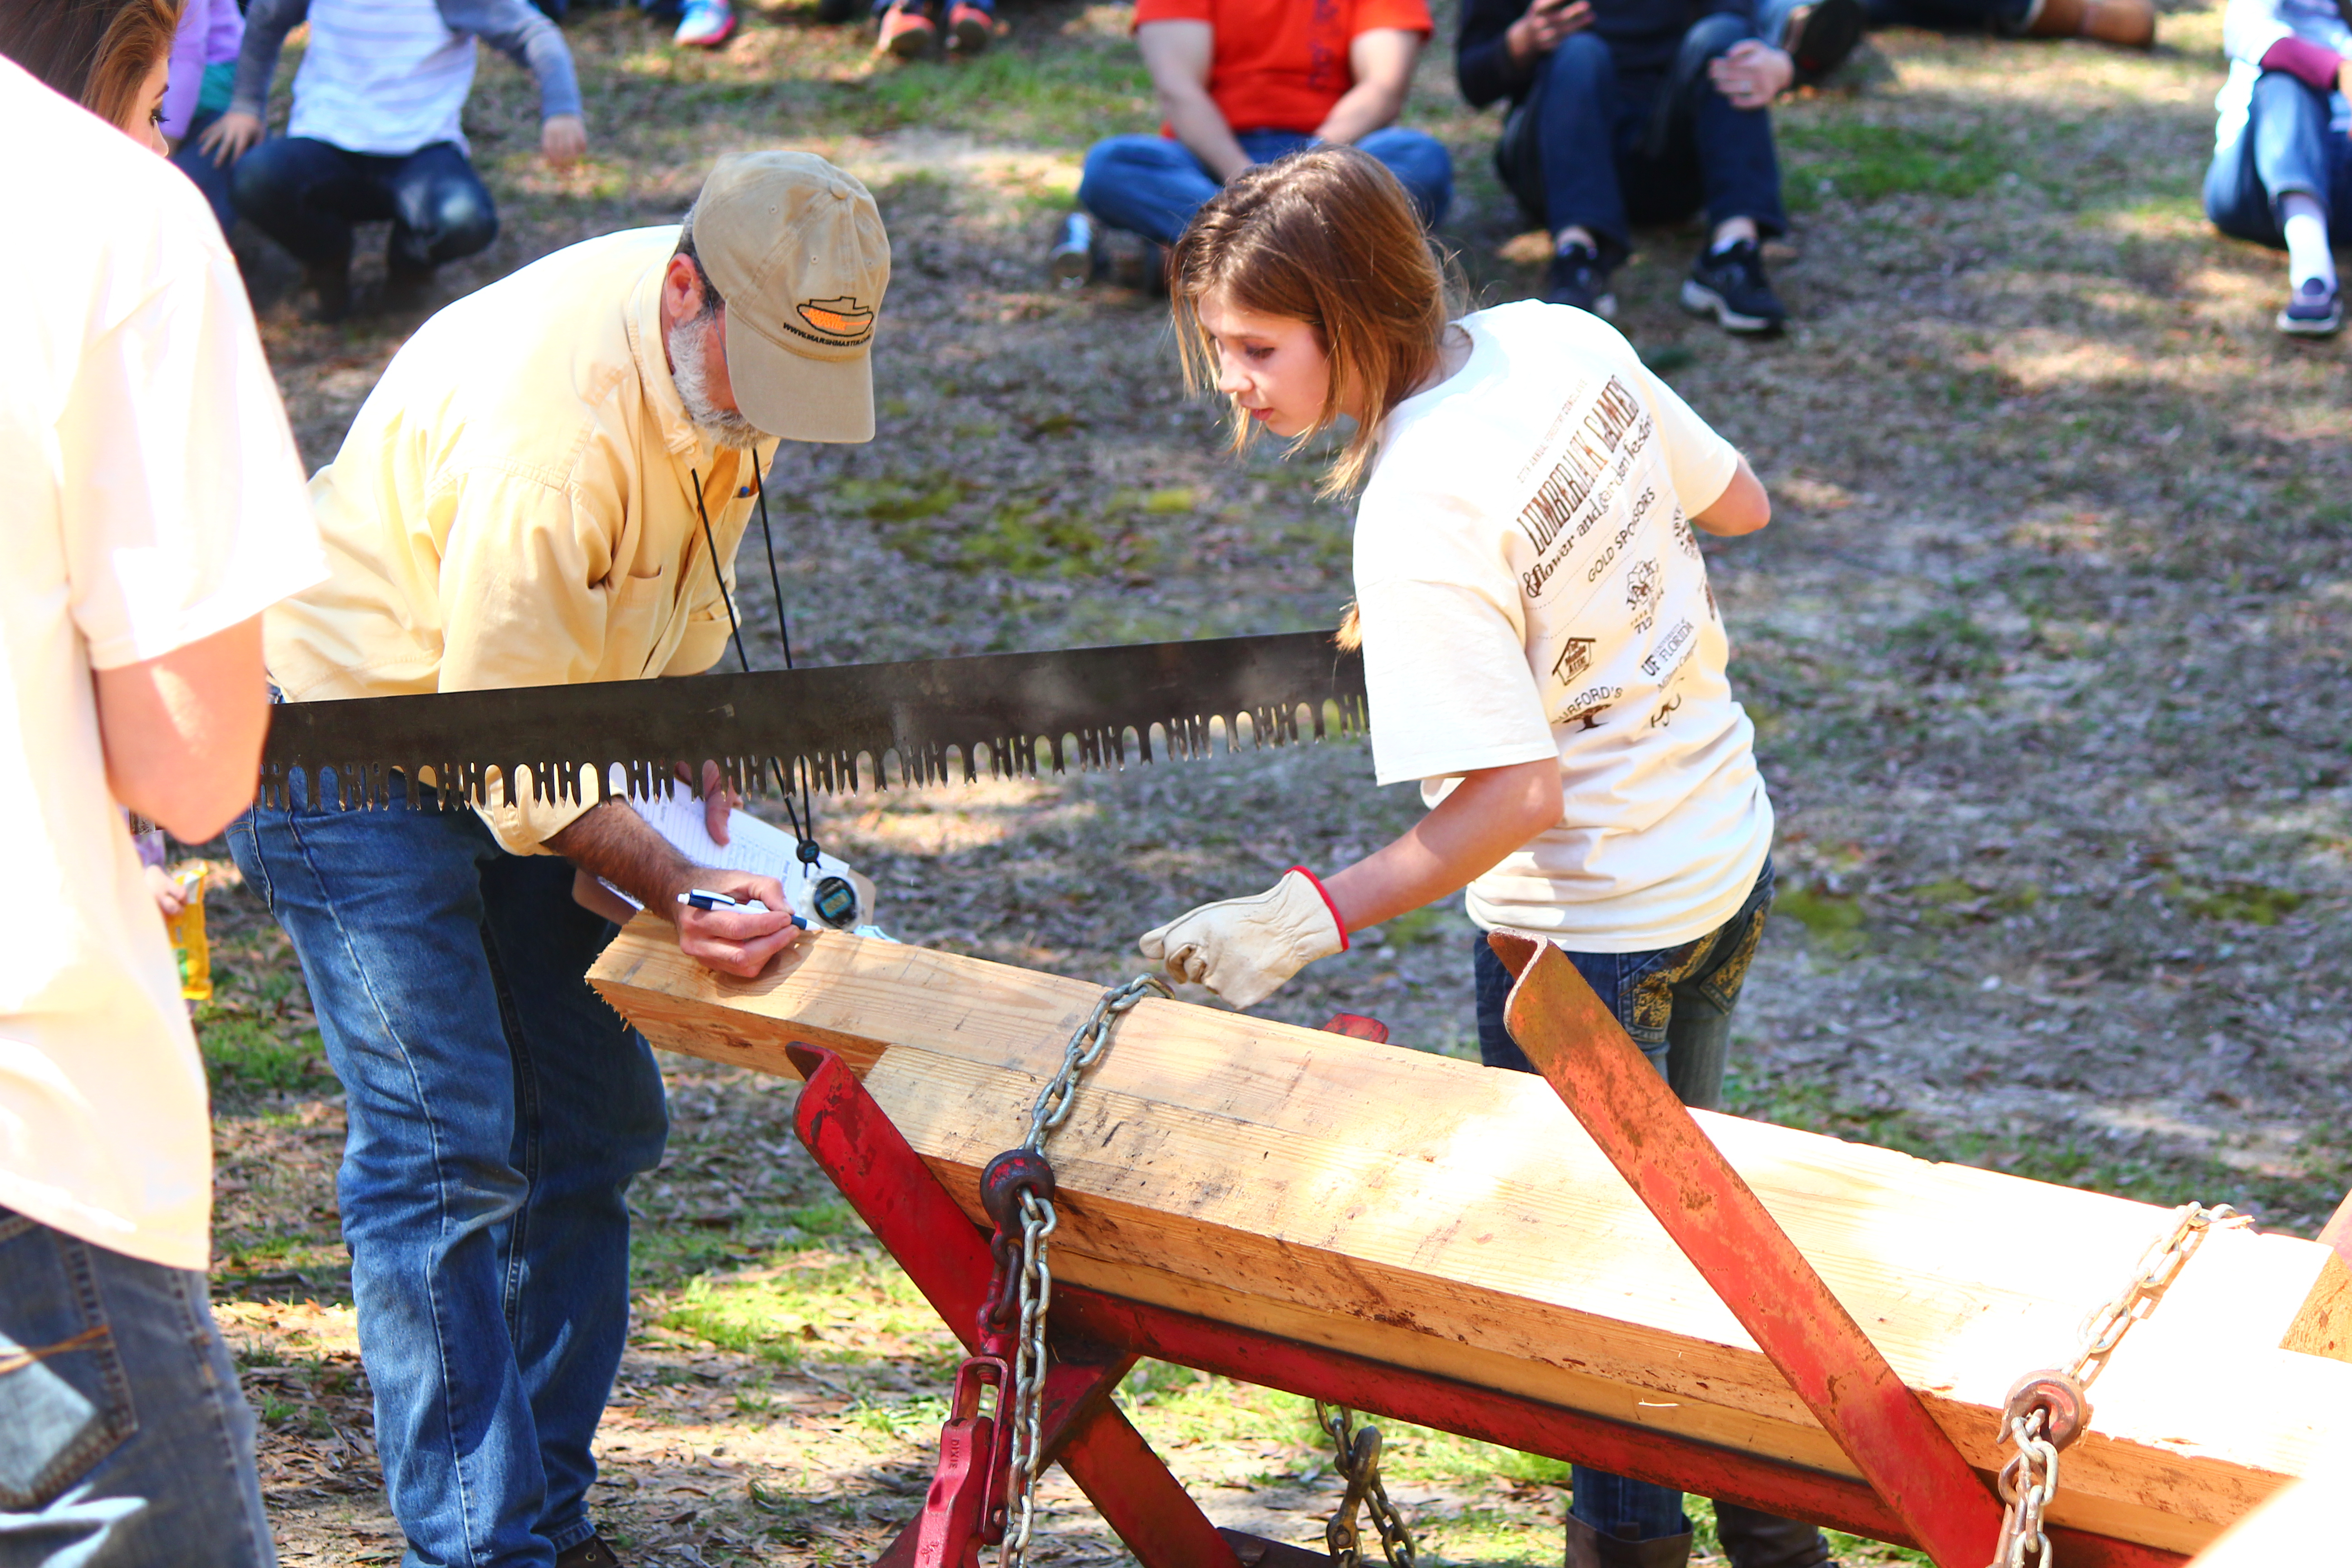 Community involvement sprouts at Lumberjack Festival